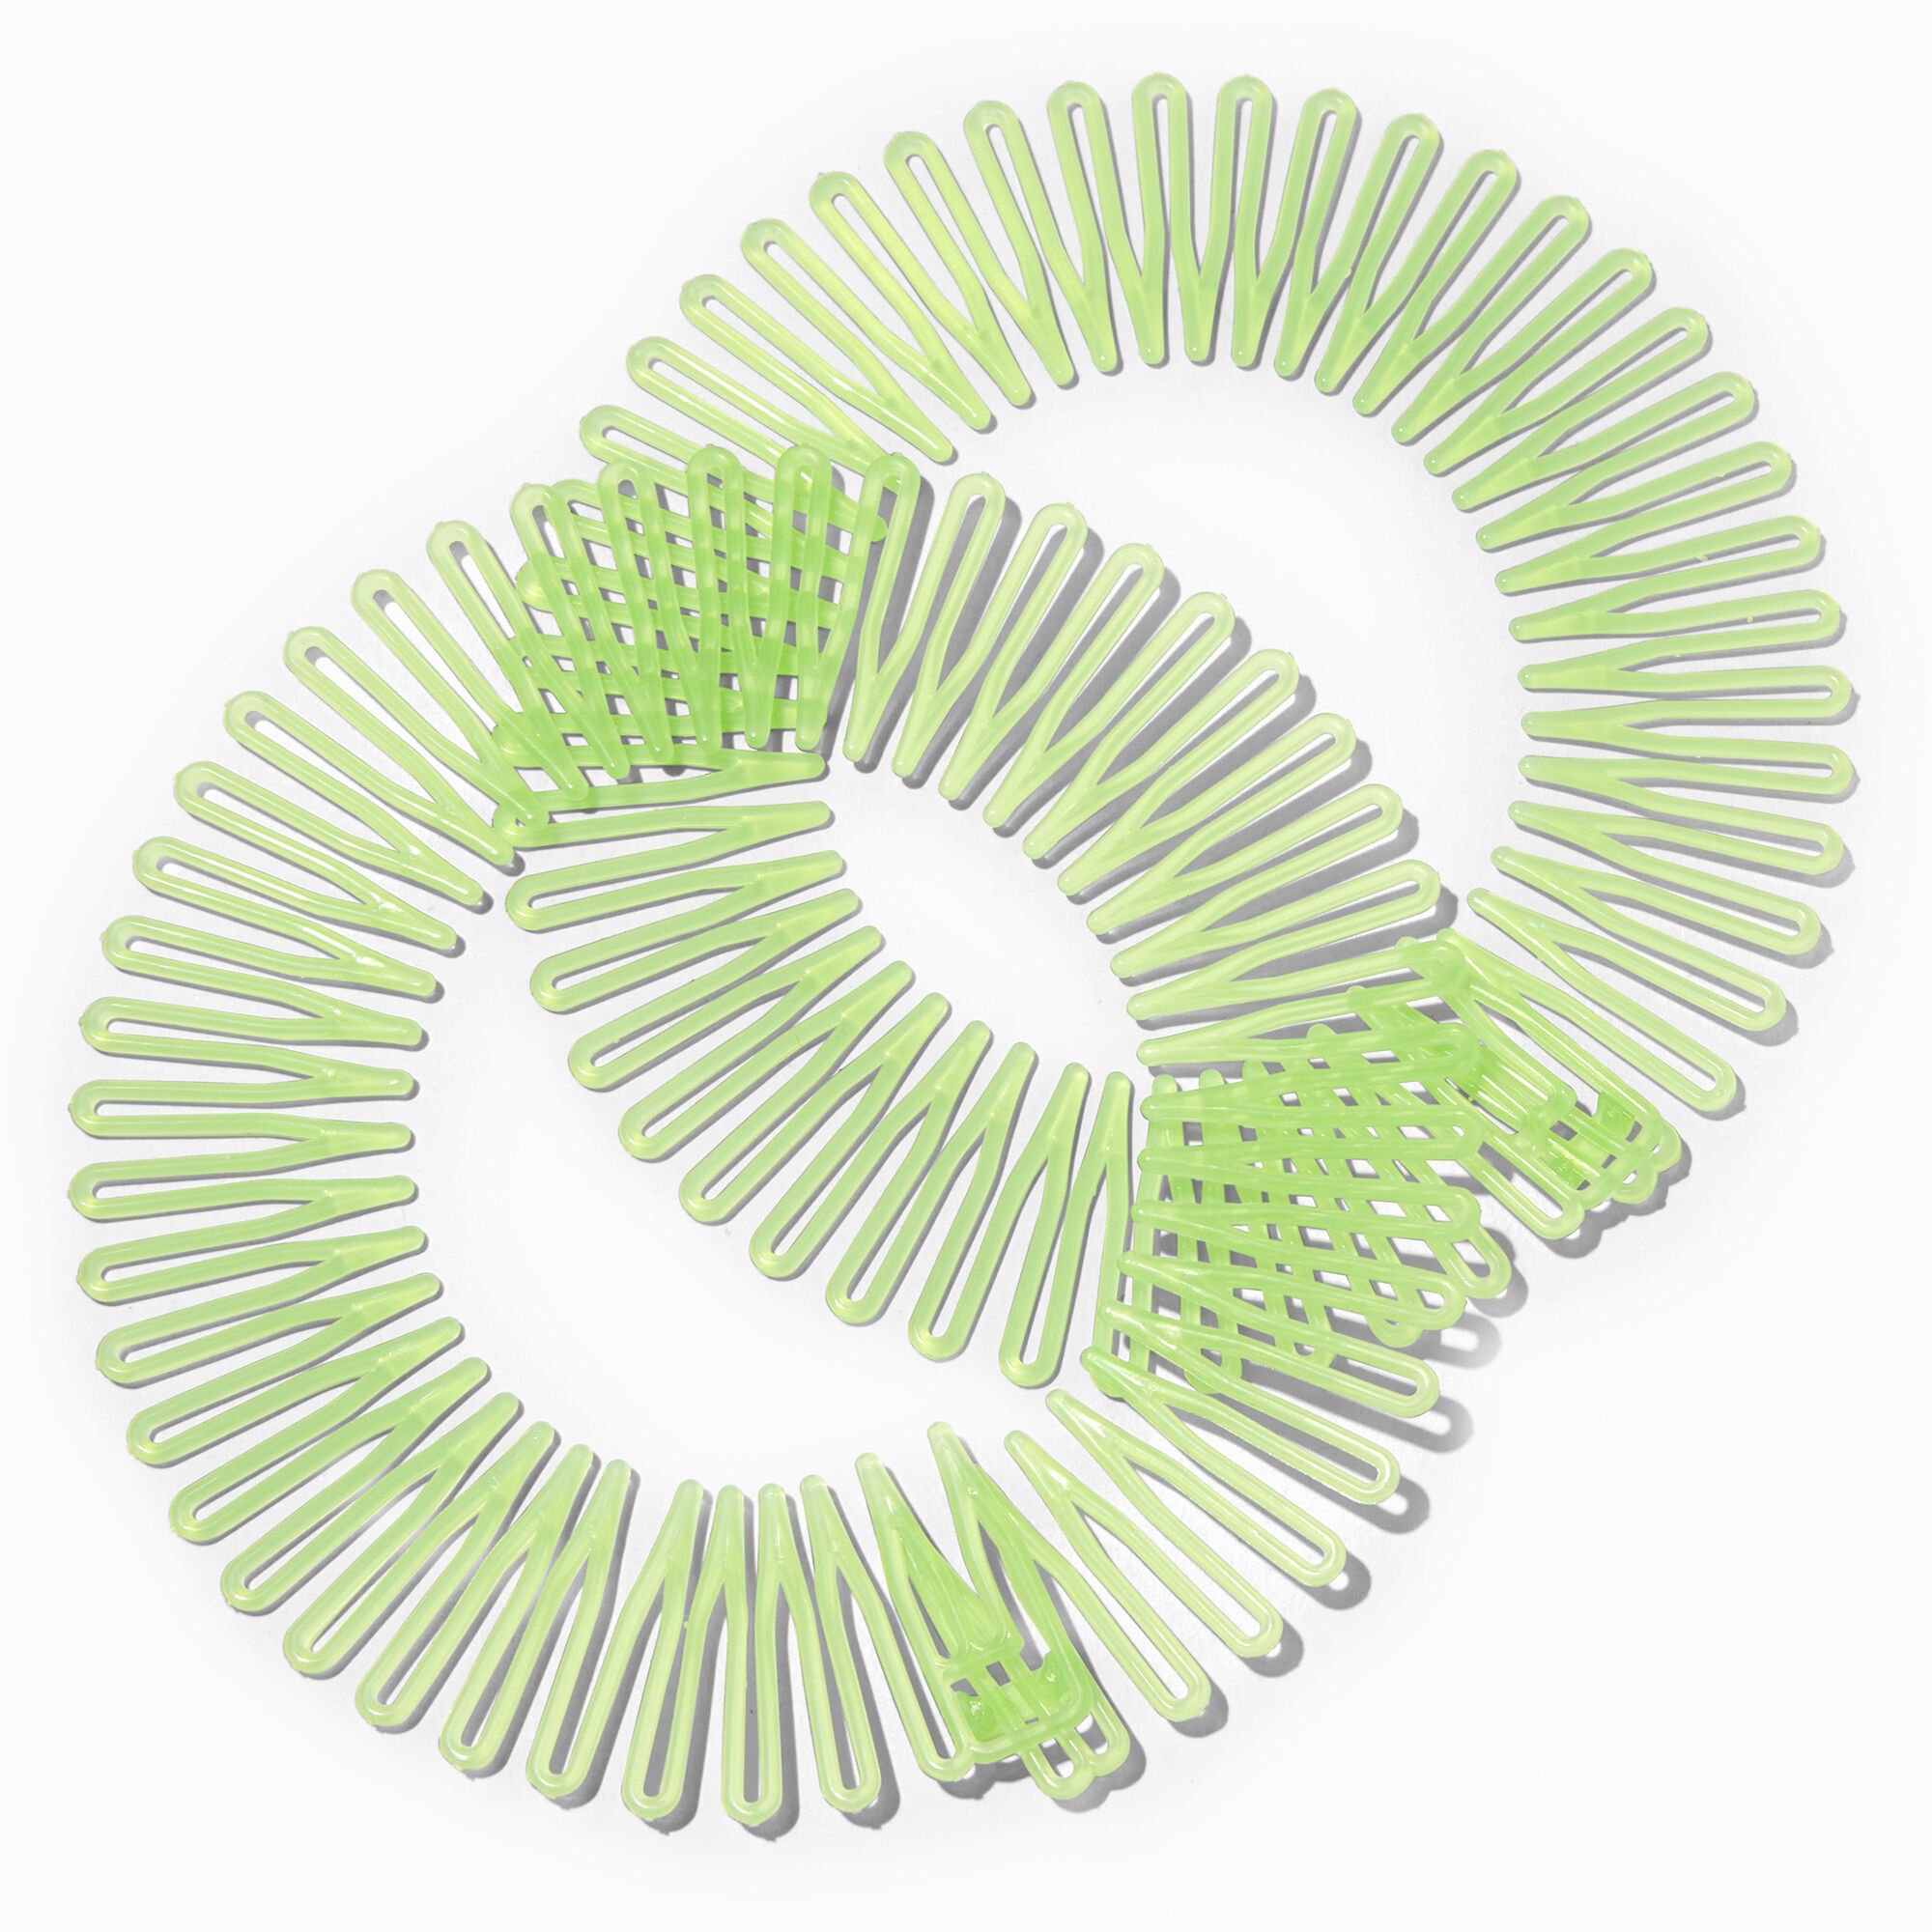 View Claires Glow In The Dark Accordion Headbands 2 Pack Green information